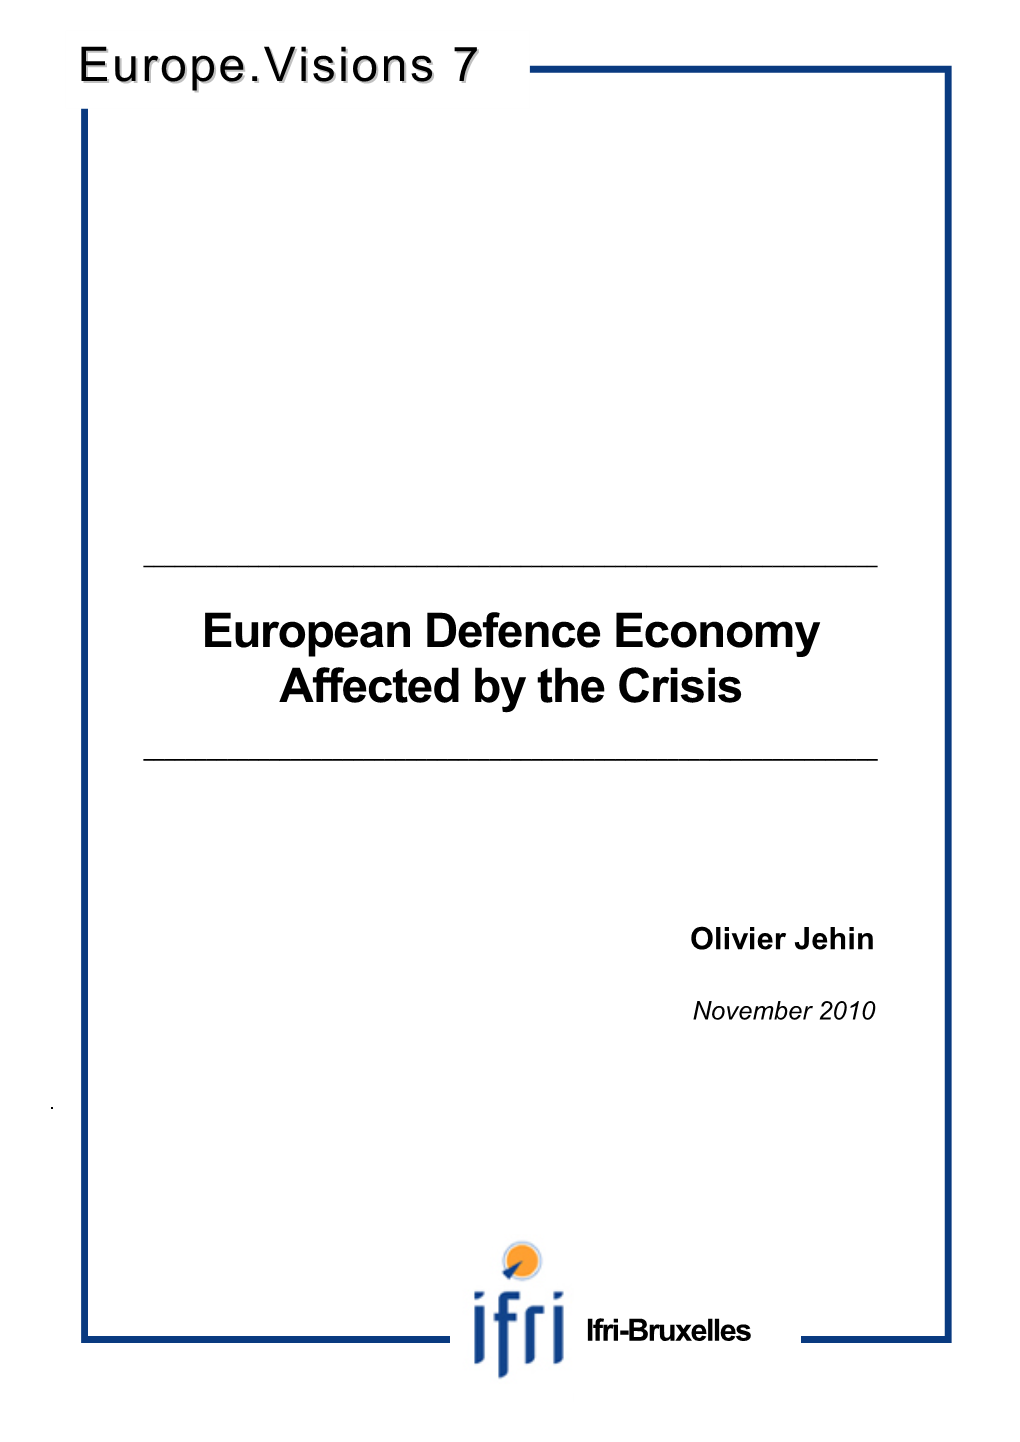 European Defence Economy Affected by the Crisis Europe.Visions 7